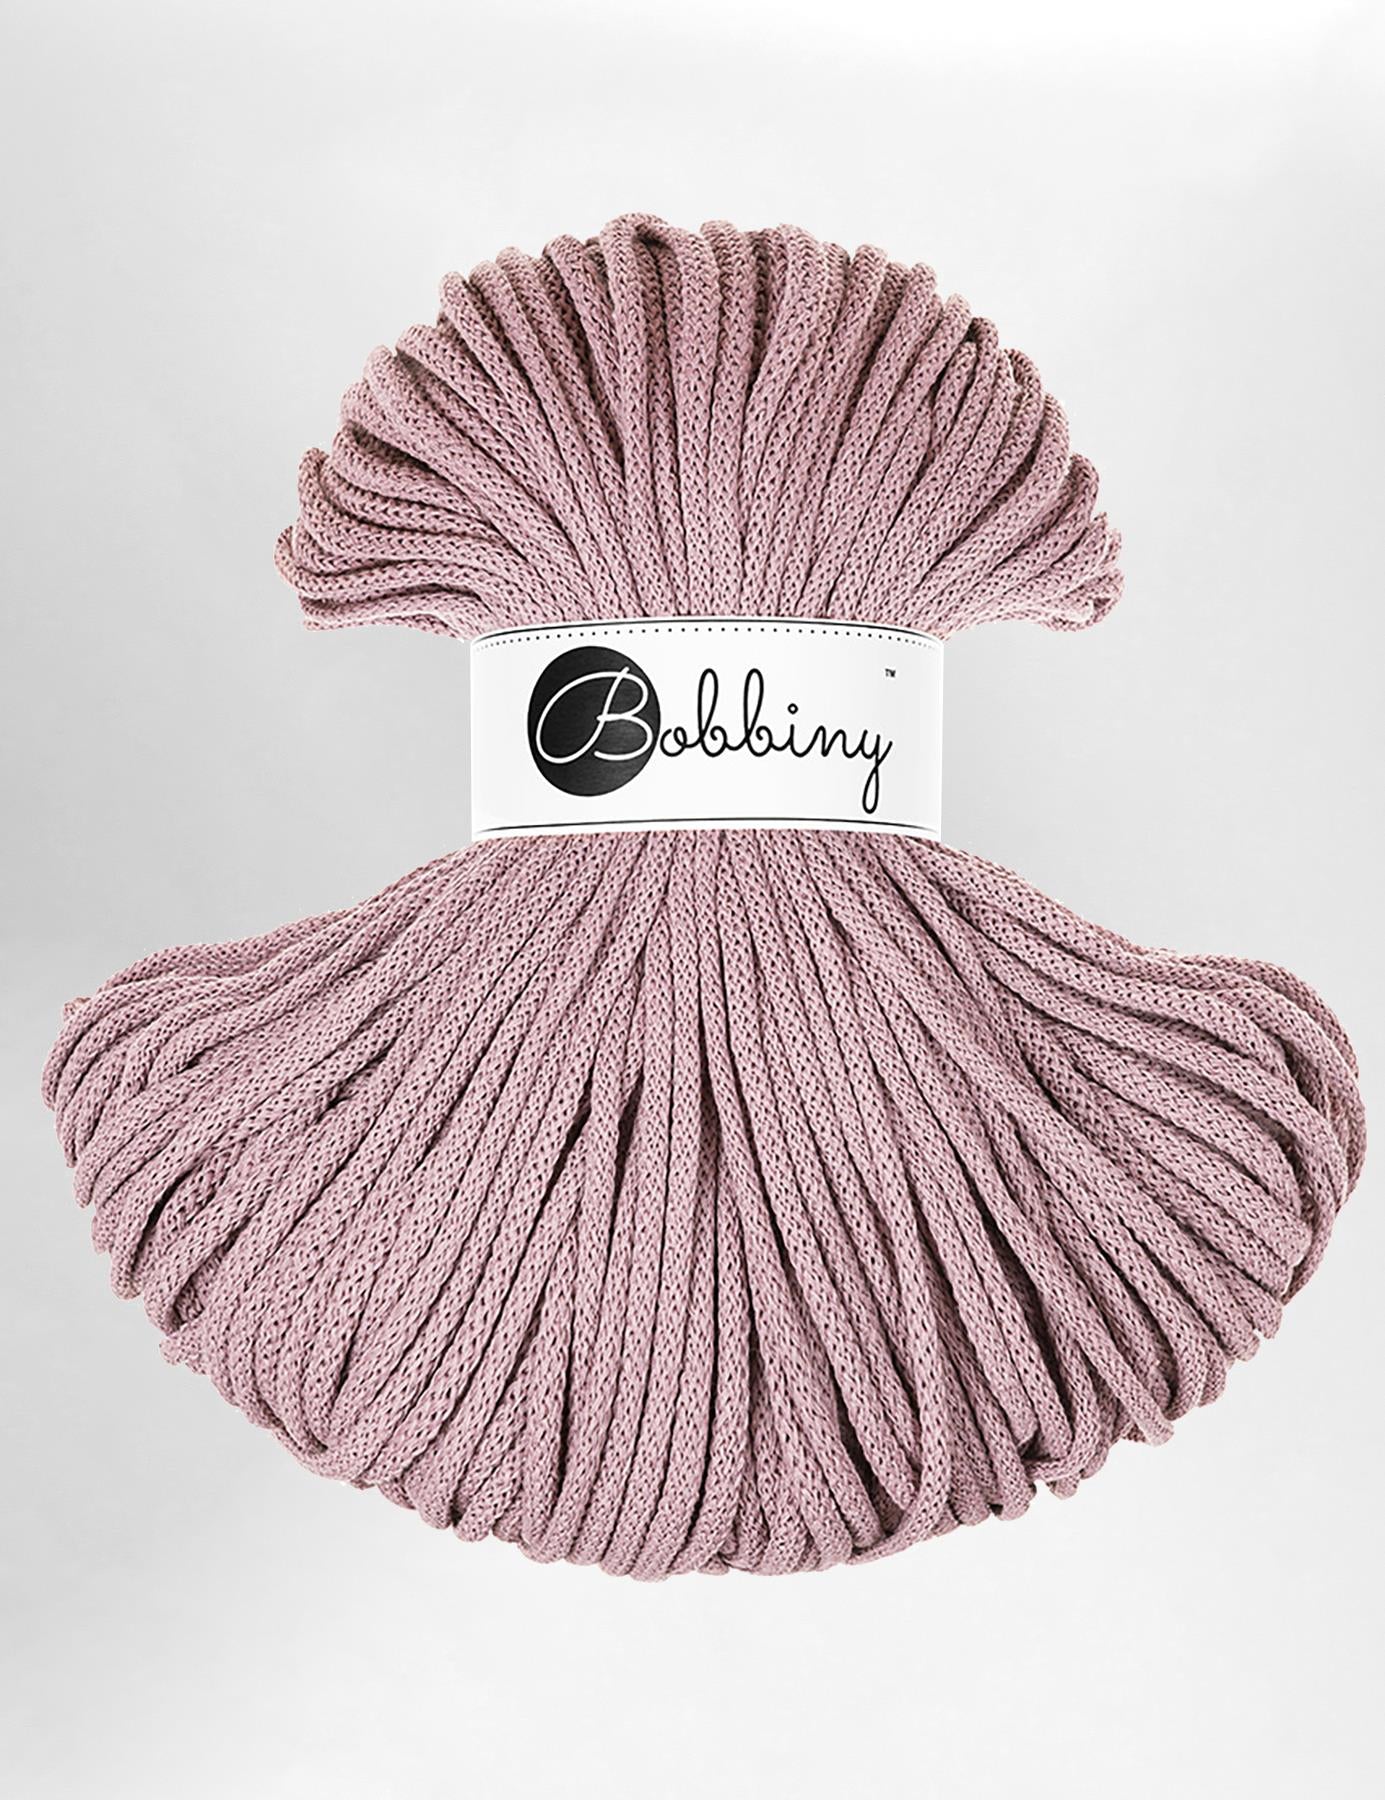 5mm Mauve recycled cotton macrame cord by Bobbiny (100m)